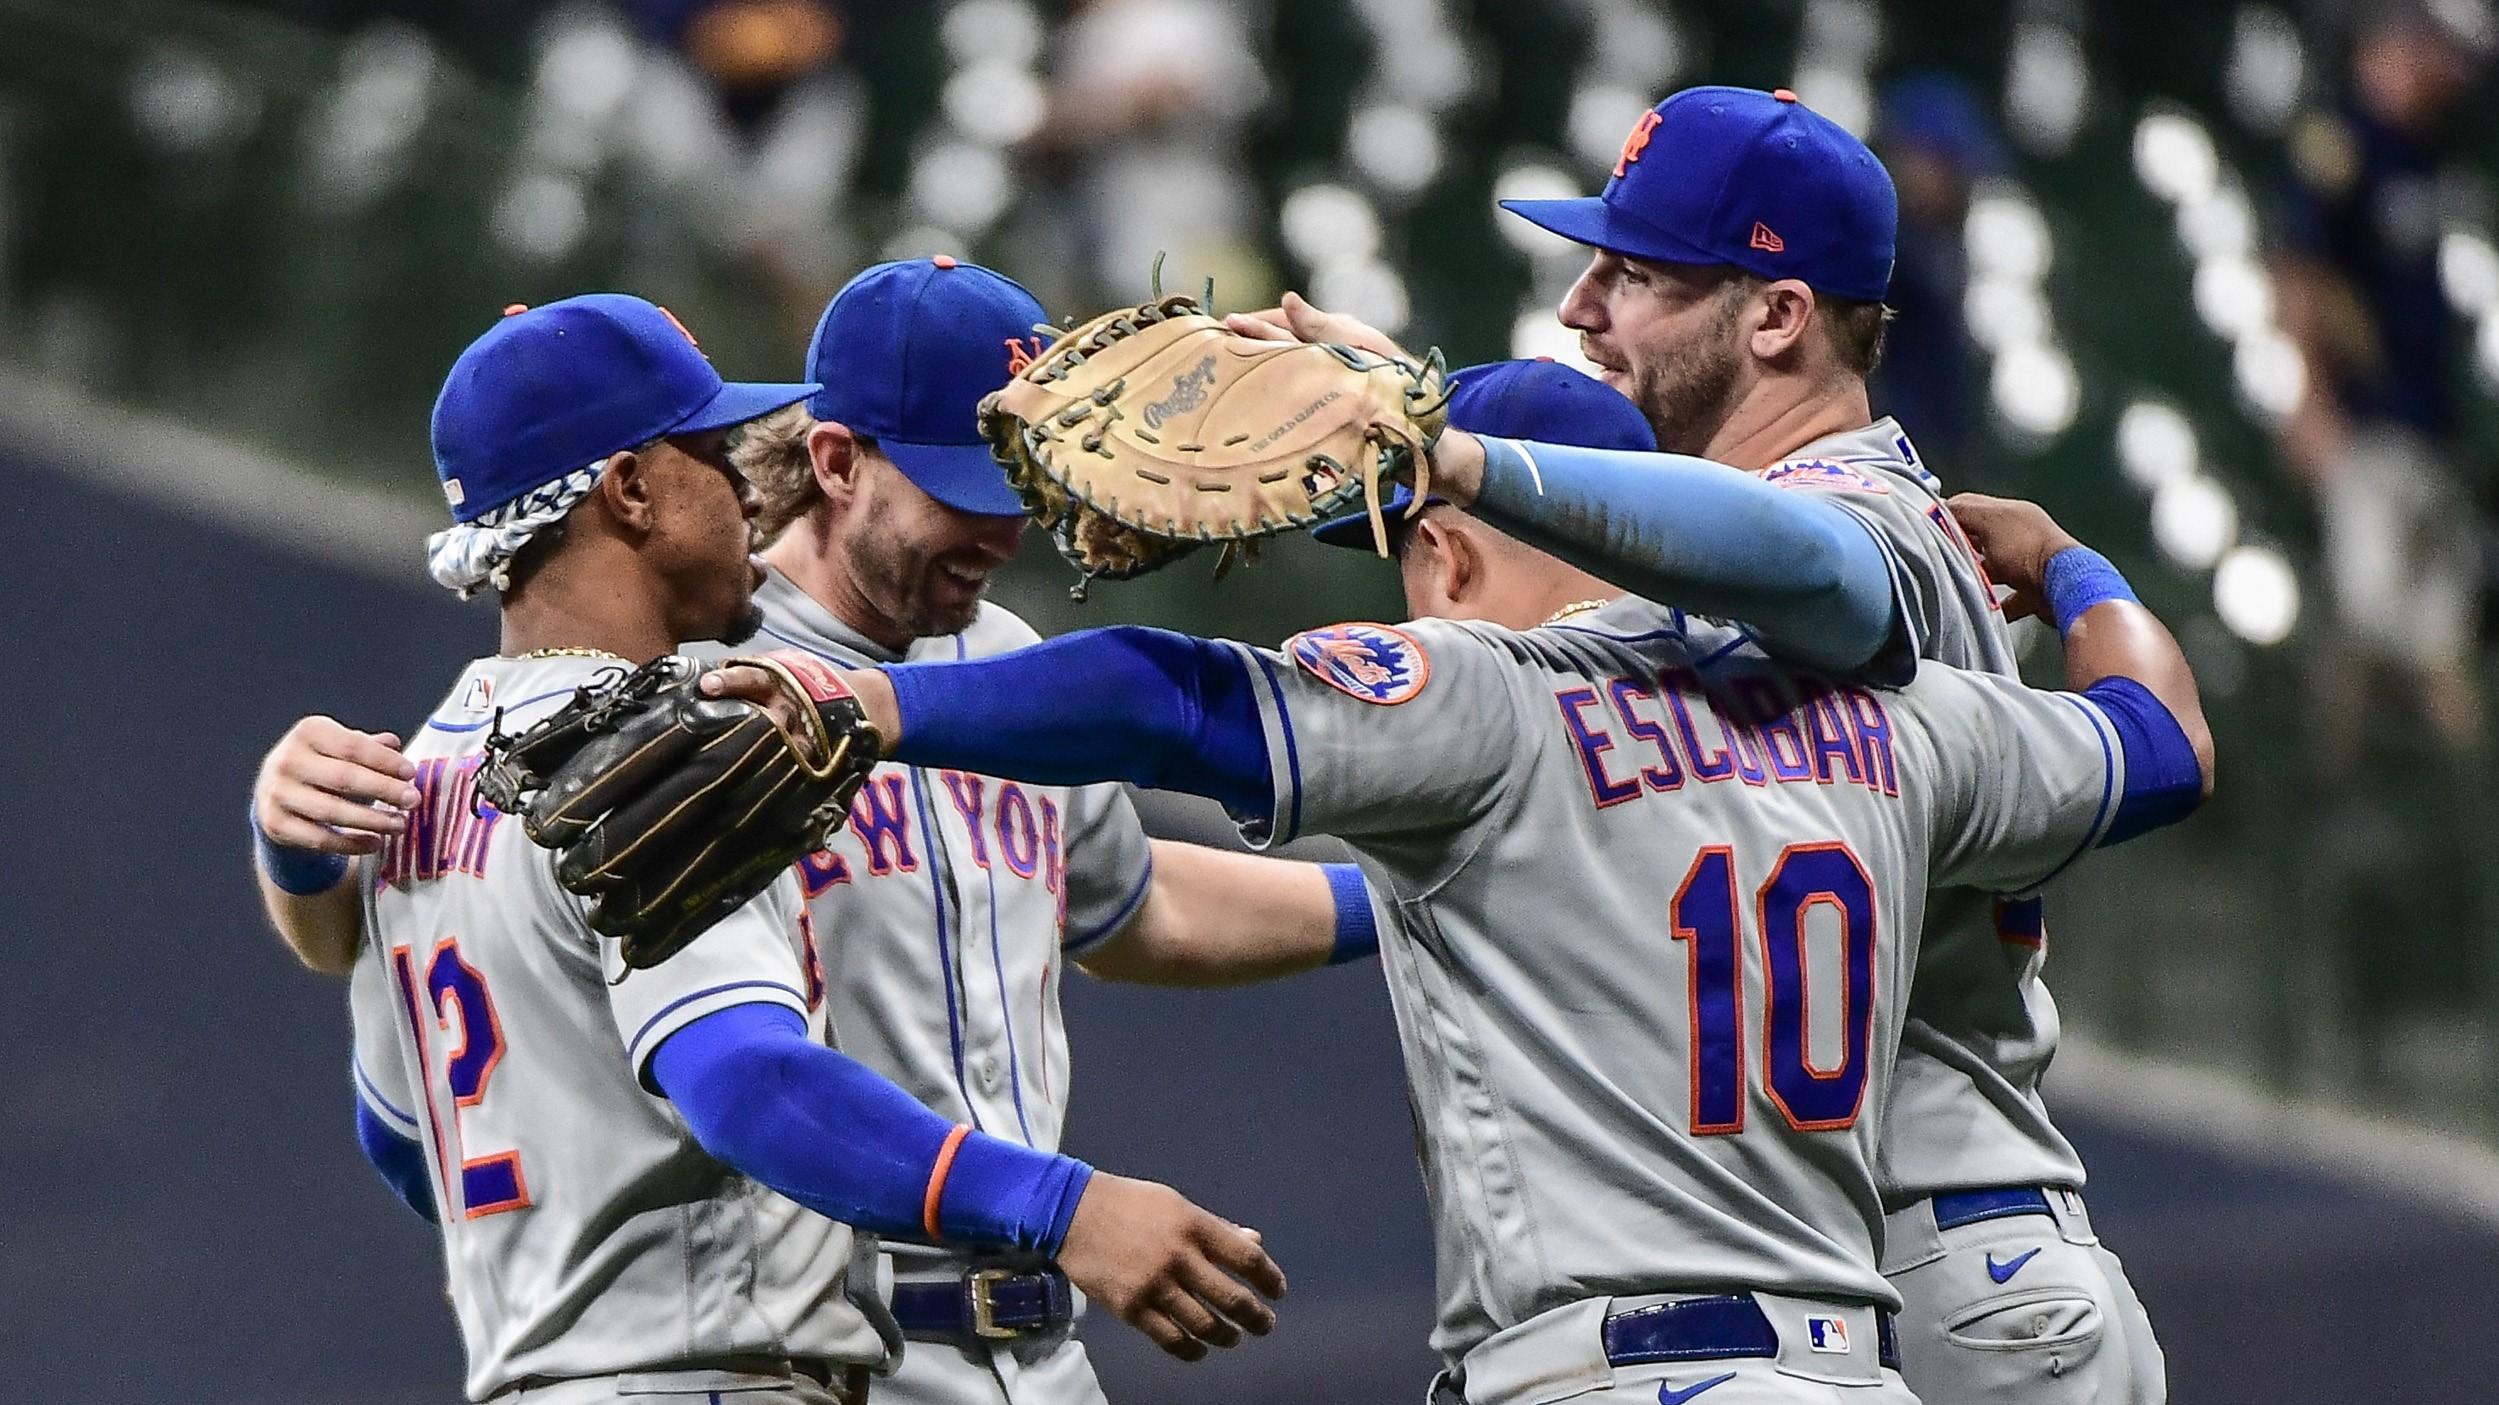 Sep 19, 2022; Milwaukee, Wisconsin, USA; The New York Mets celebrates after clinching a playoff spot by beating the Milwaukee Brewers at American Family Field. Mandatory Credit: Benny Sieu-USA TODAY Sports / © Benny Sieu-USA TODAY Sports